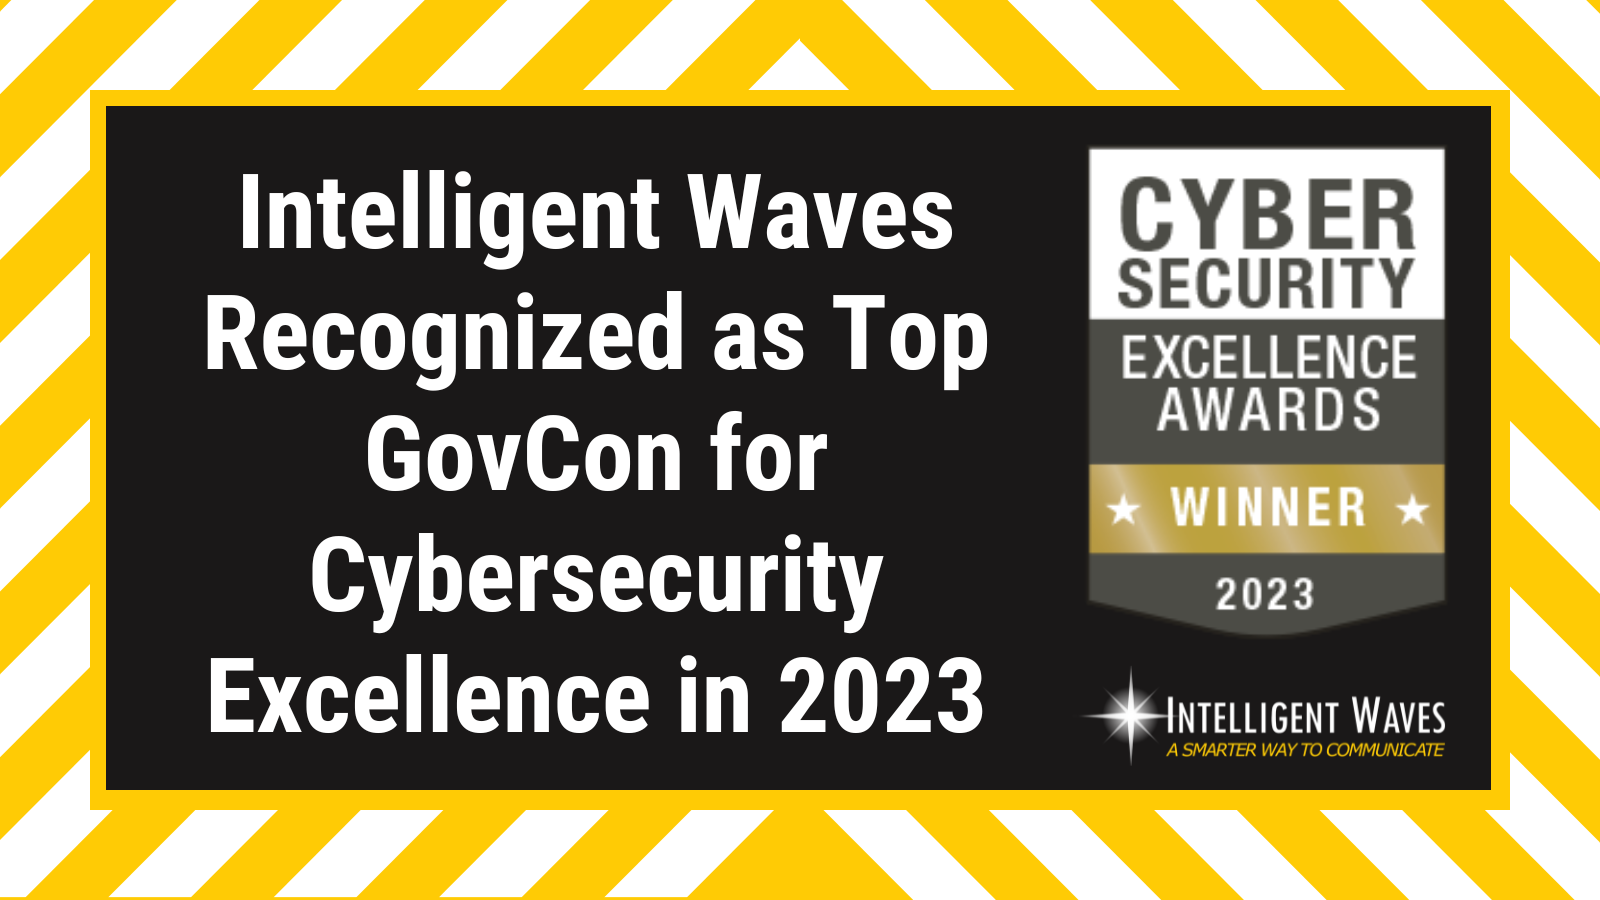 GovCon Industry Leader - Cybersecurity Excellence